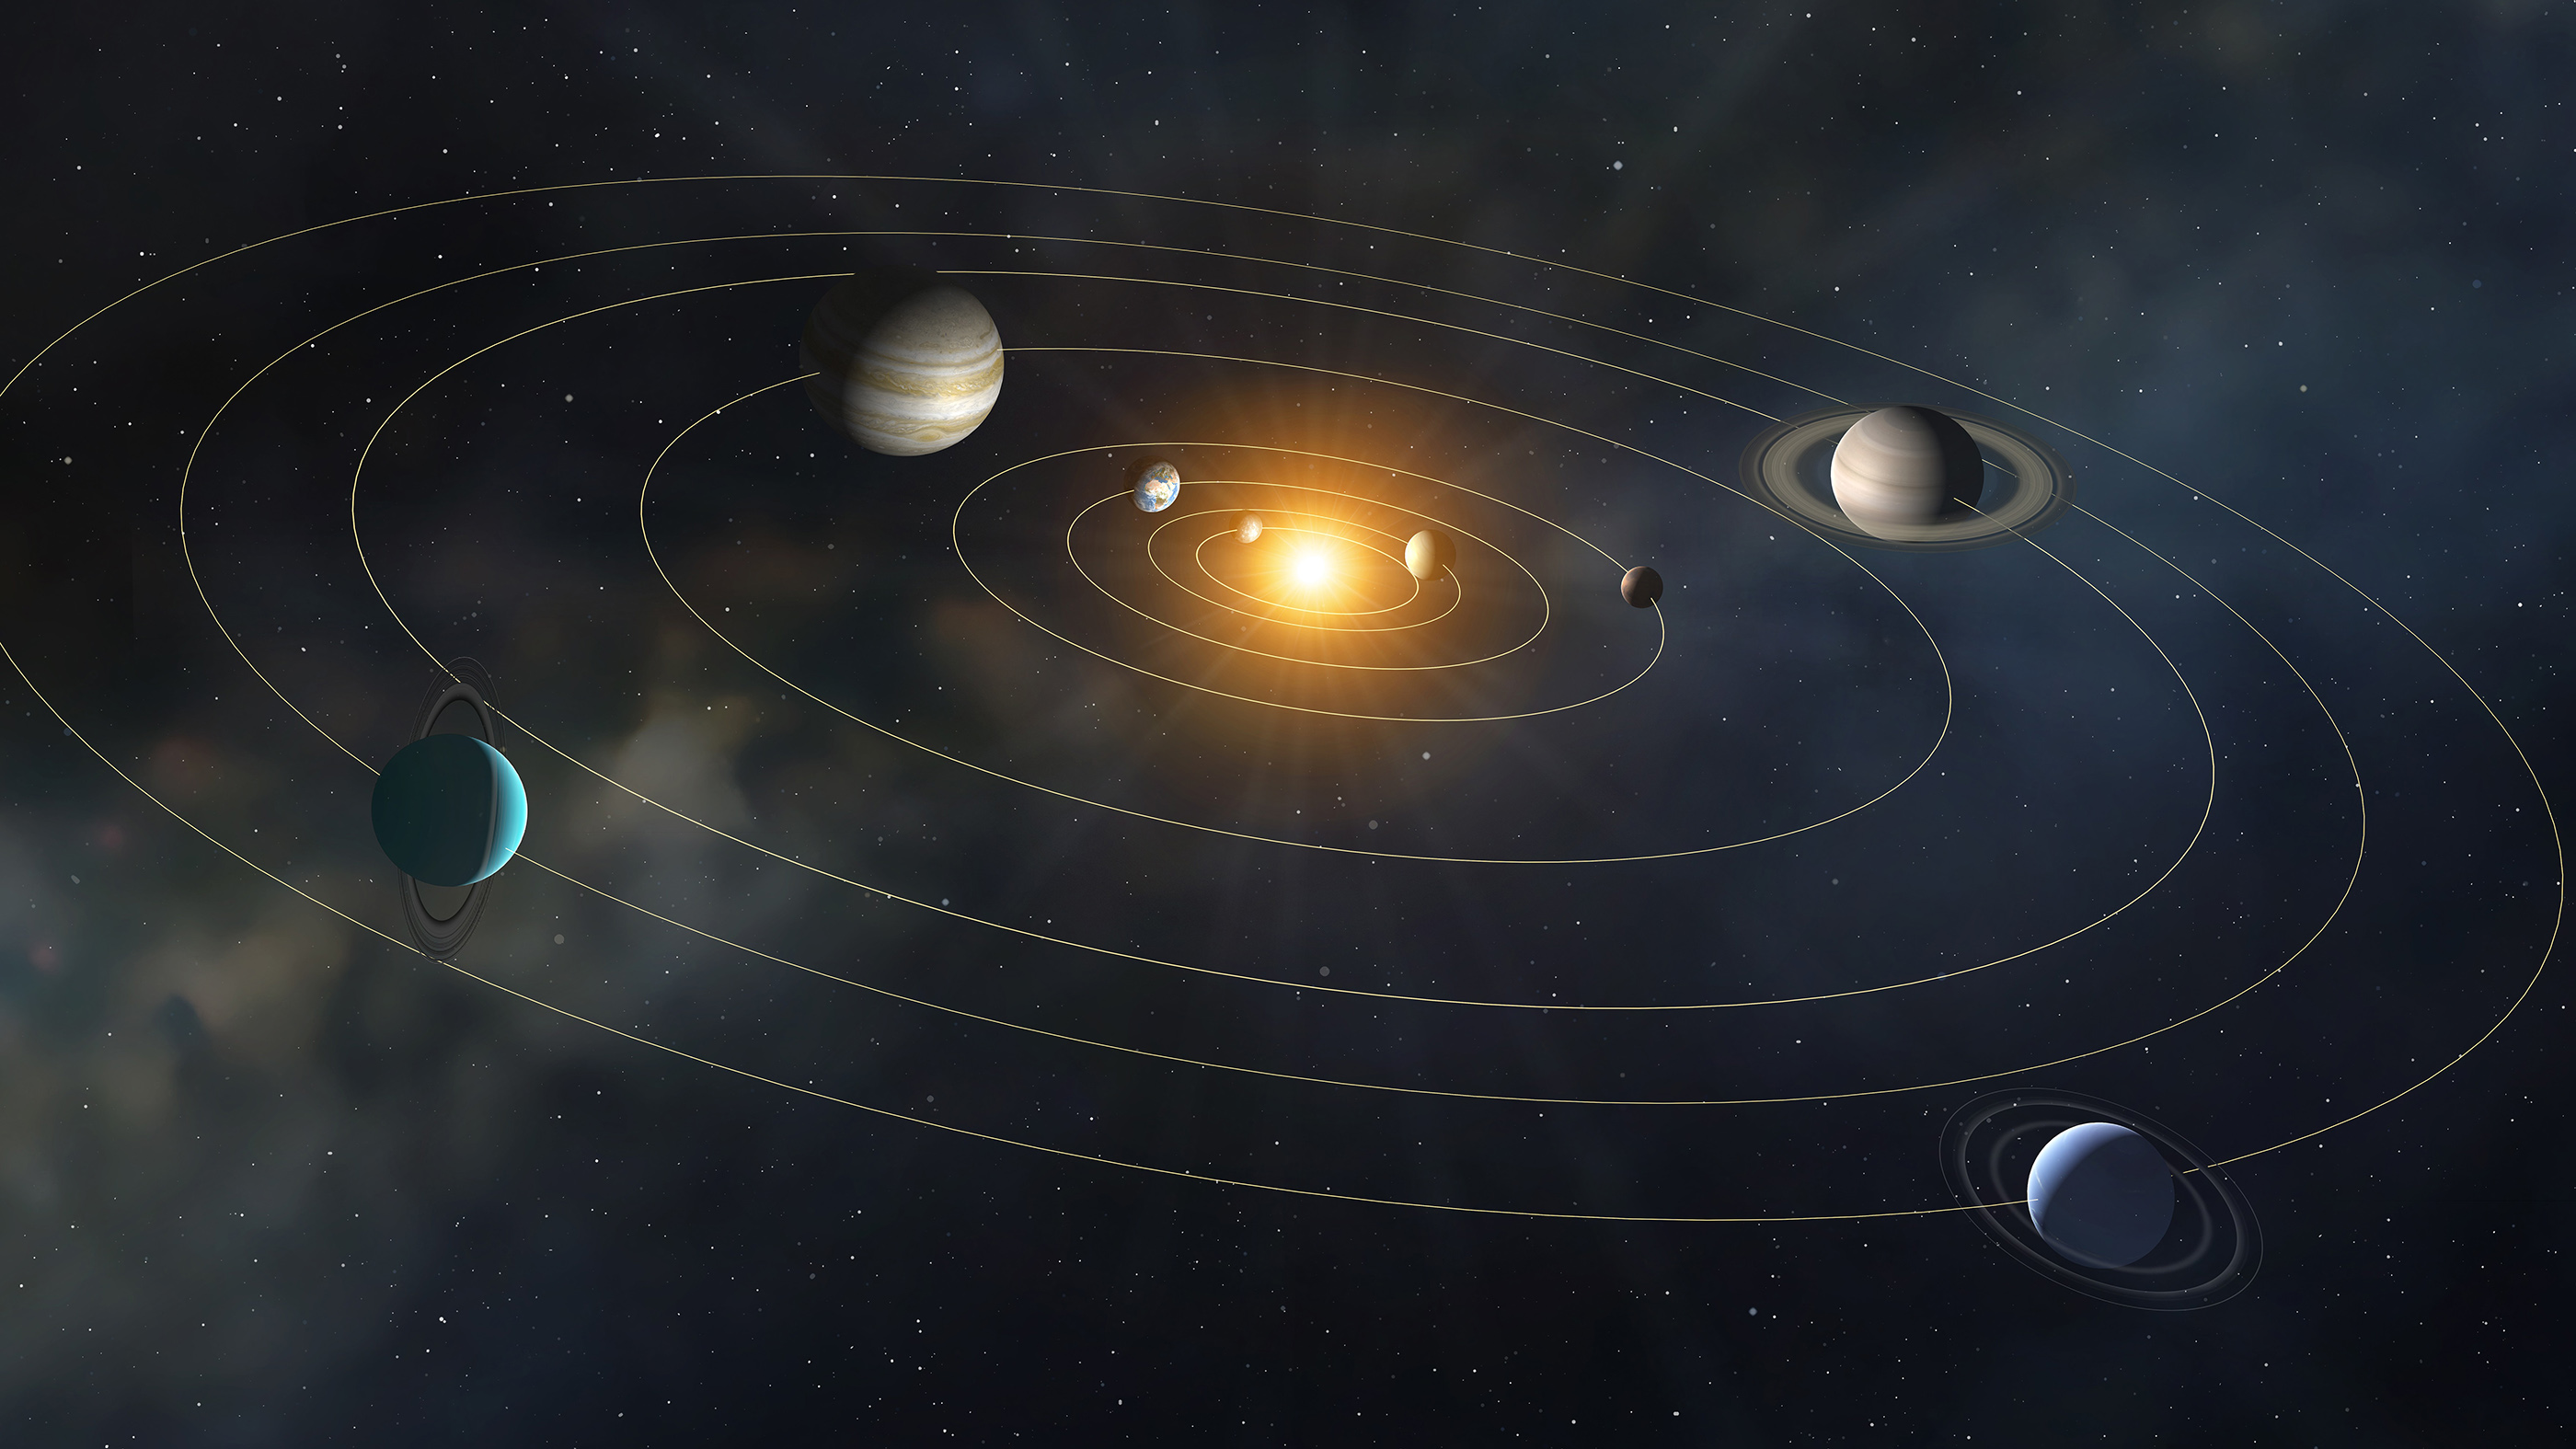 The solar system: Facts about our cosmic neighborhood | Live Science